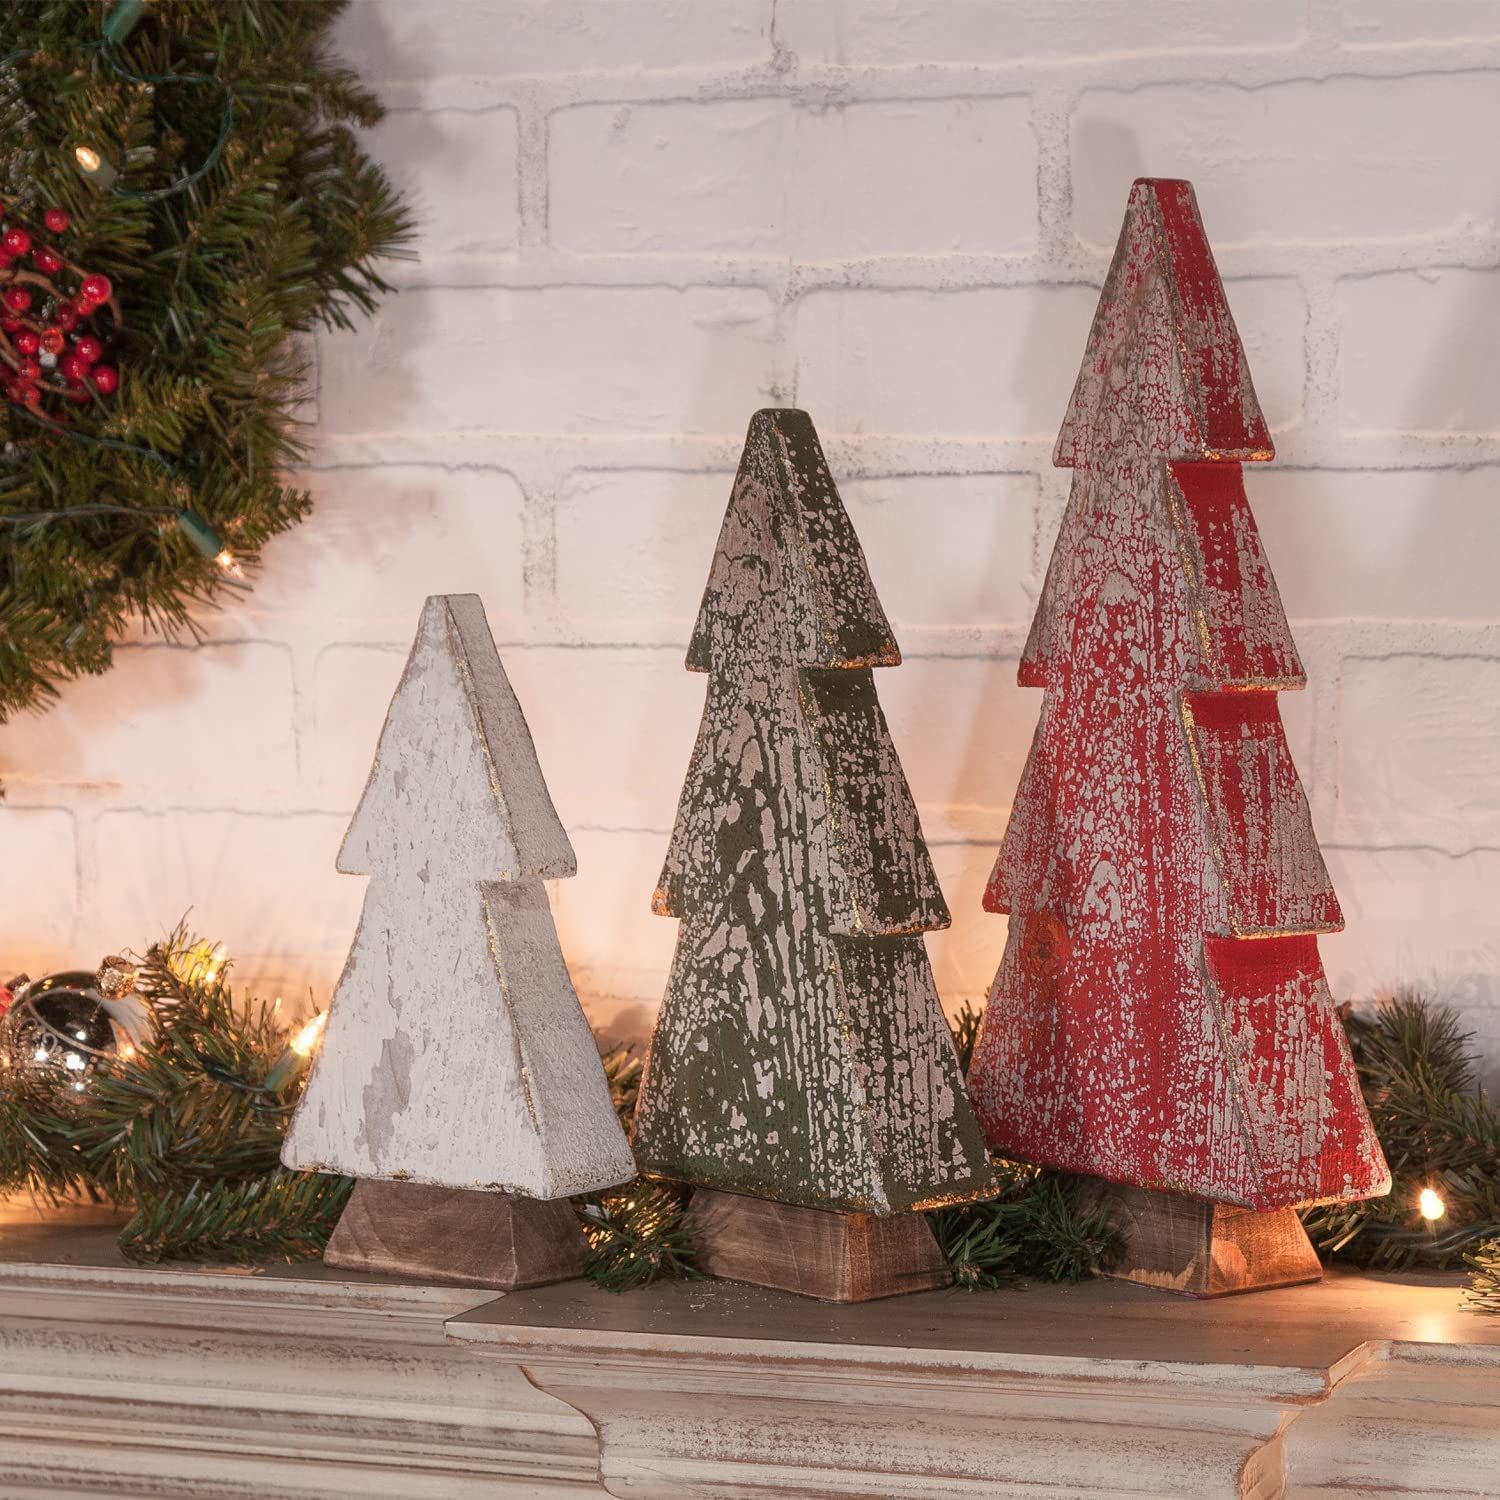 From Vintage Decor to Christmas Holiday Decorations